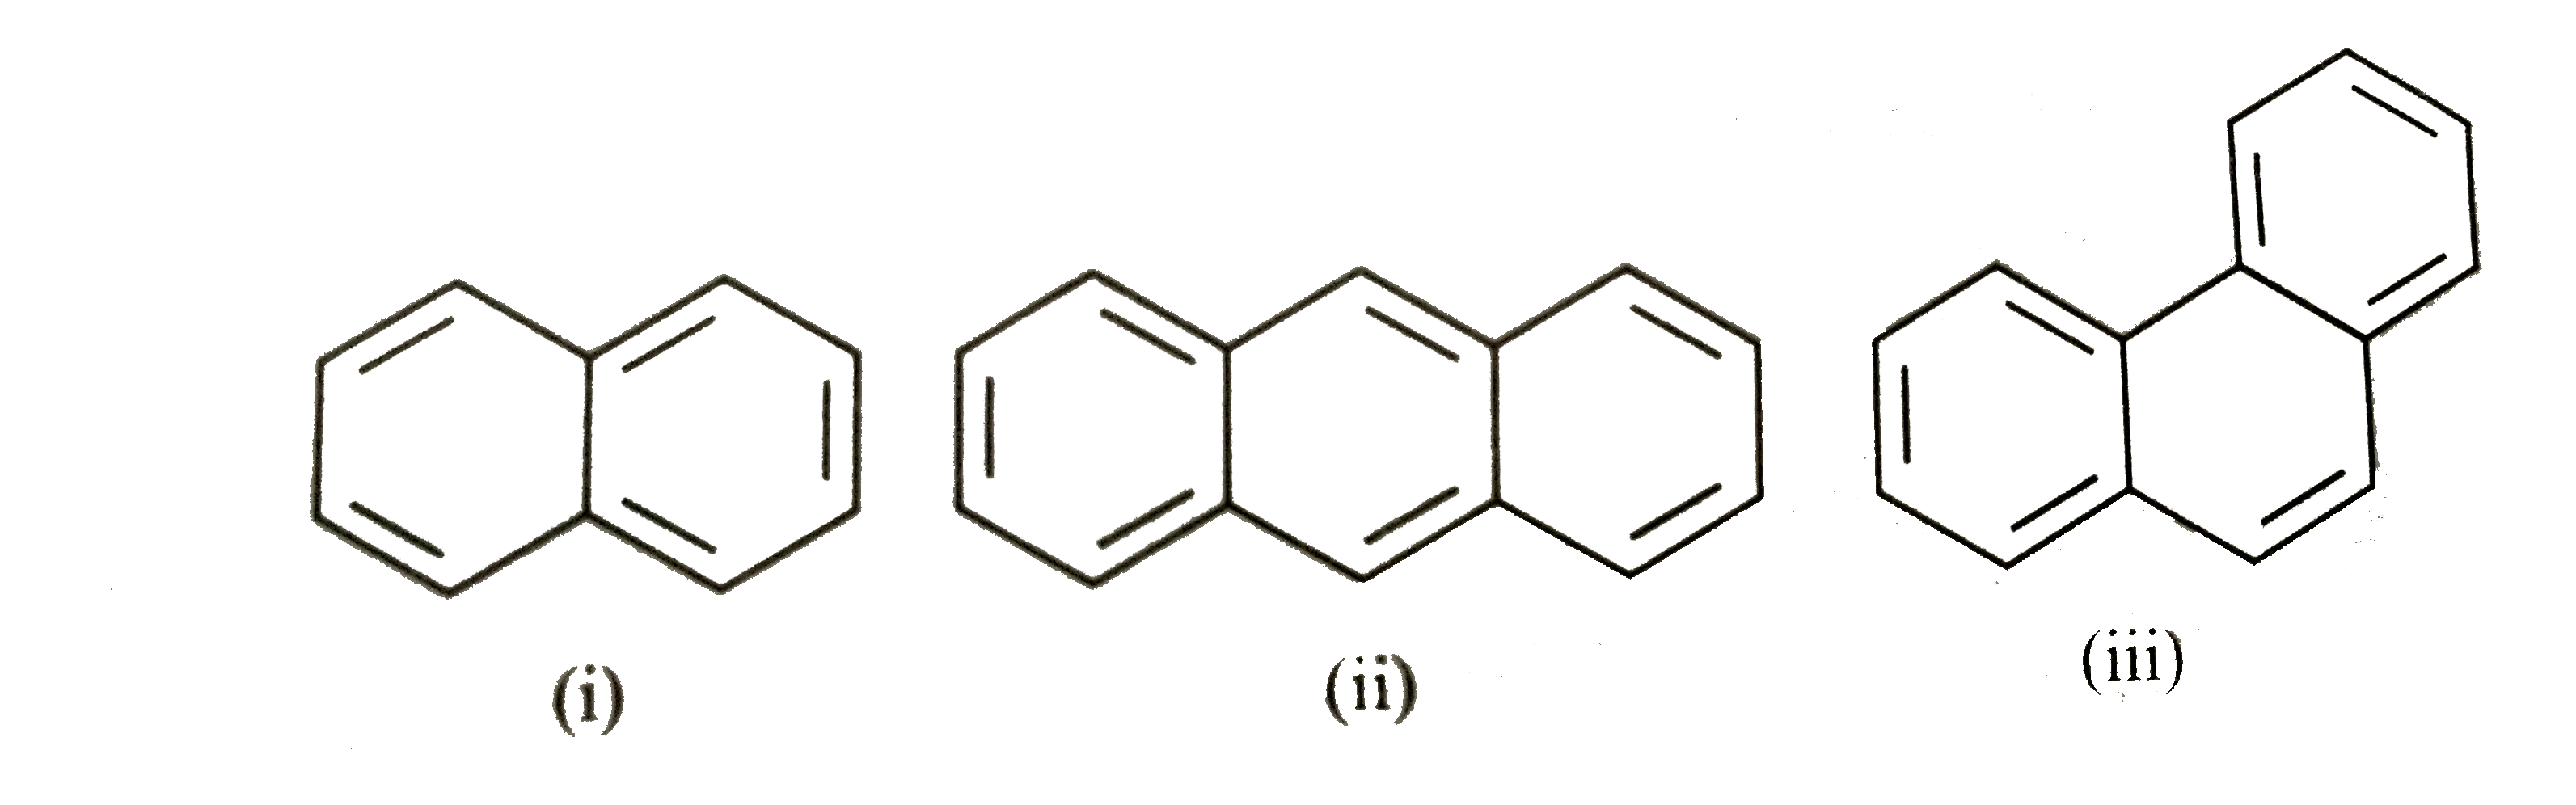 Identify the polynuclear aromatic compound which is aromatic.